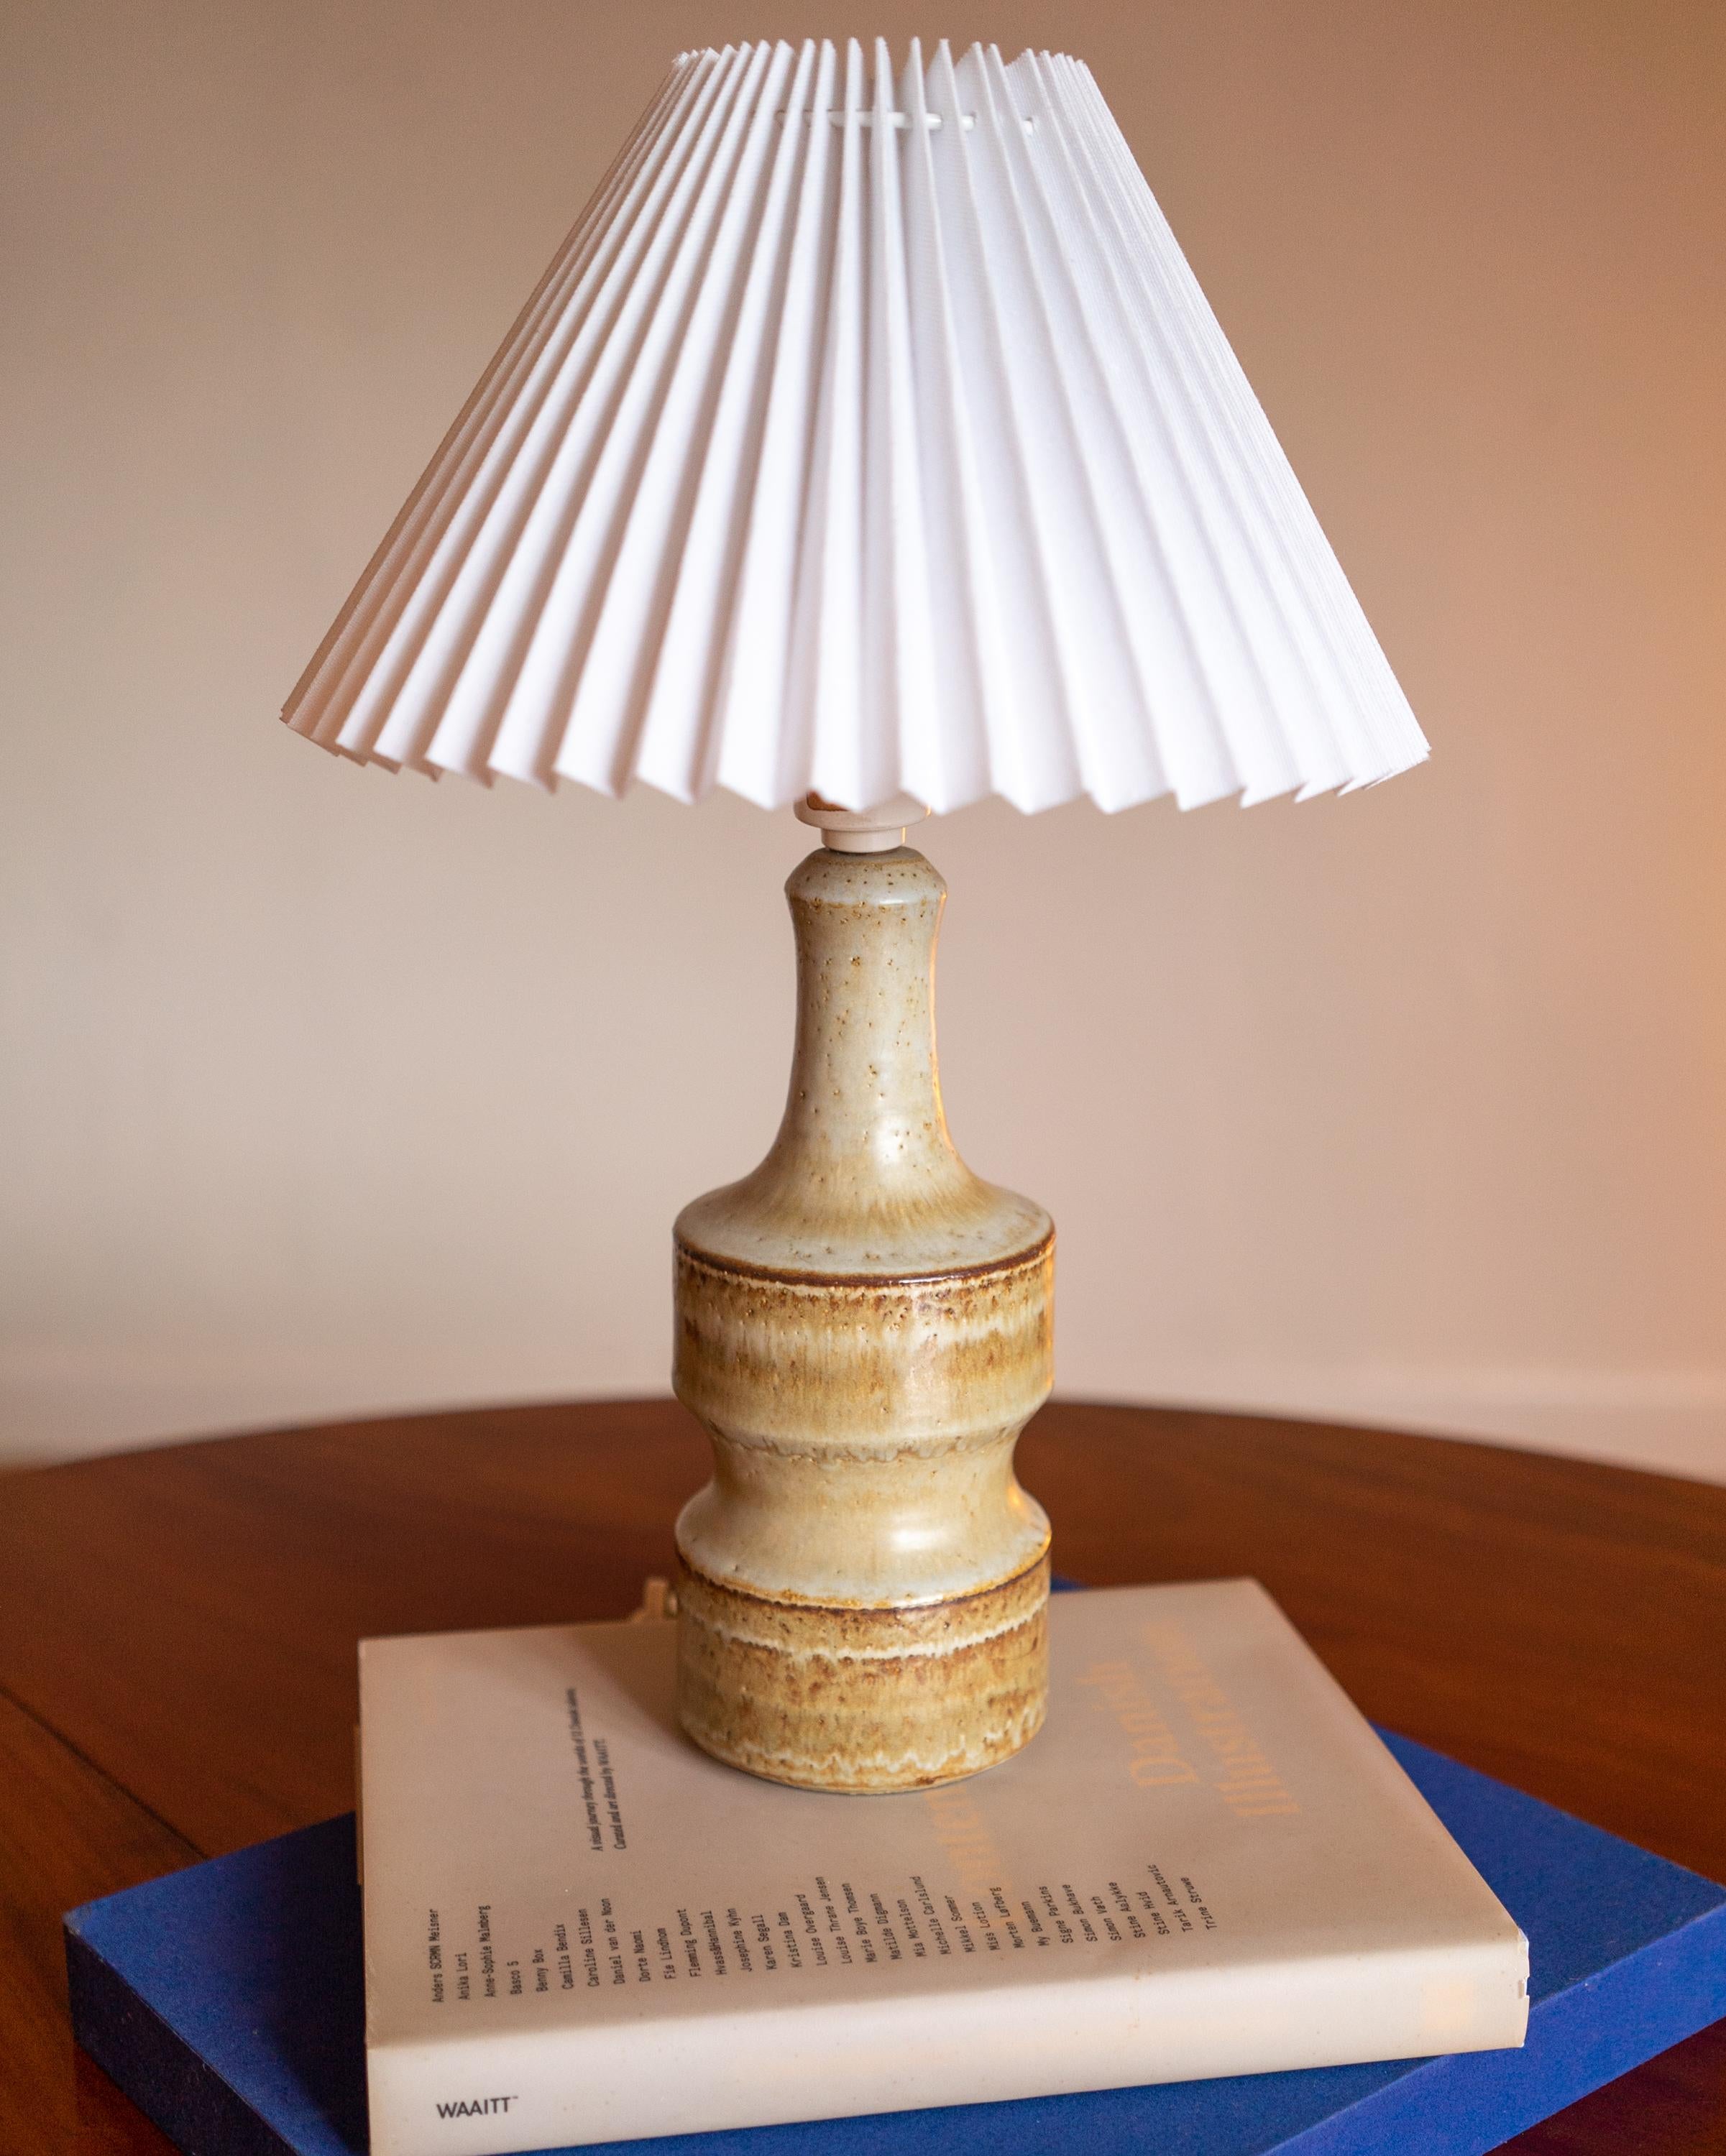 A ceramic table lamp produced by Søholm Keramik, located on the island of Bornholm in Denmark in the 1960s. 

Switch on fitting. Stamped and signed on base.. Fully functional and in good condition.

Sold without lampshade. Stated dimensions